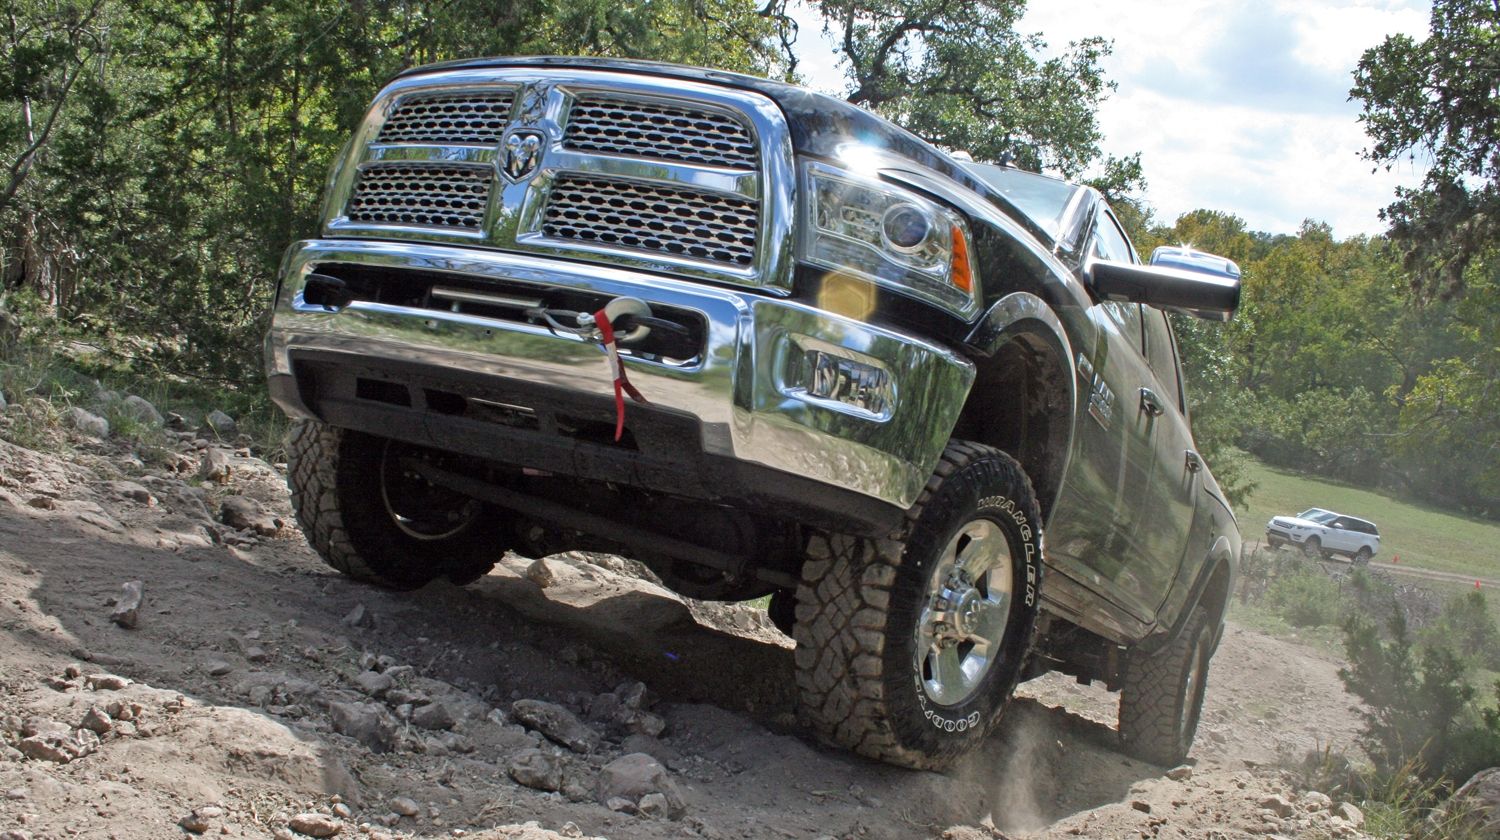  Mark McNabb had took some time behind the wheel of the Ram Power Wagon, see what he thought of it at TopSpeed.com